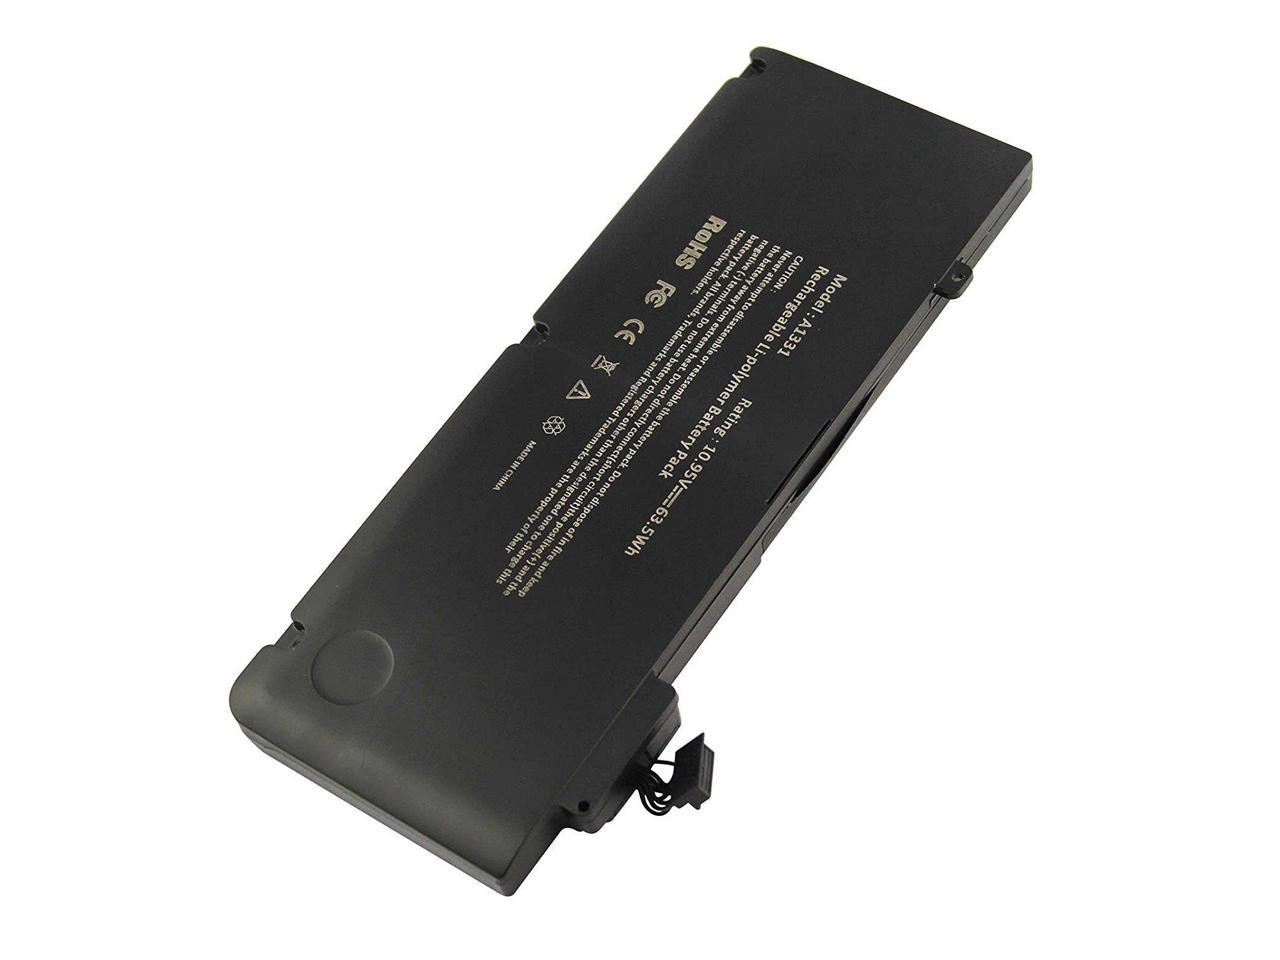 macbook pro 13 mid 2009 battery replacement